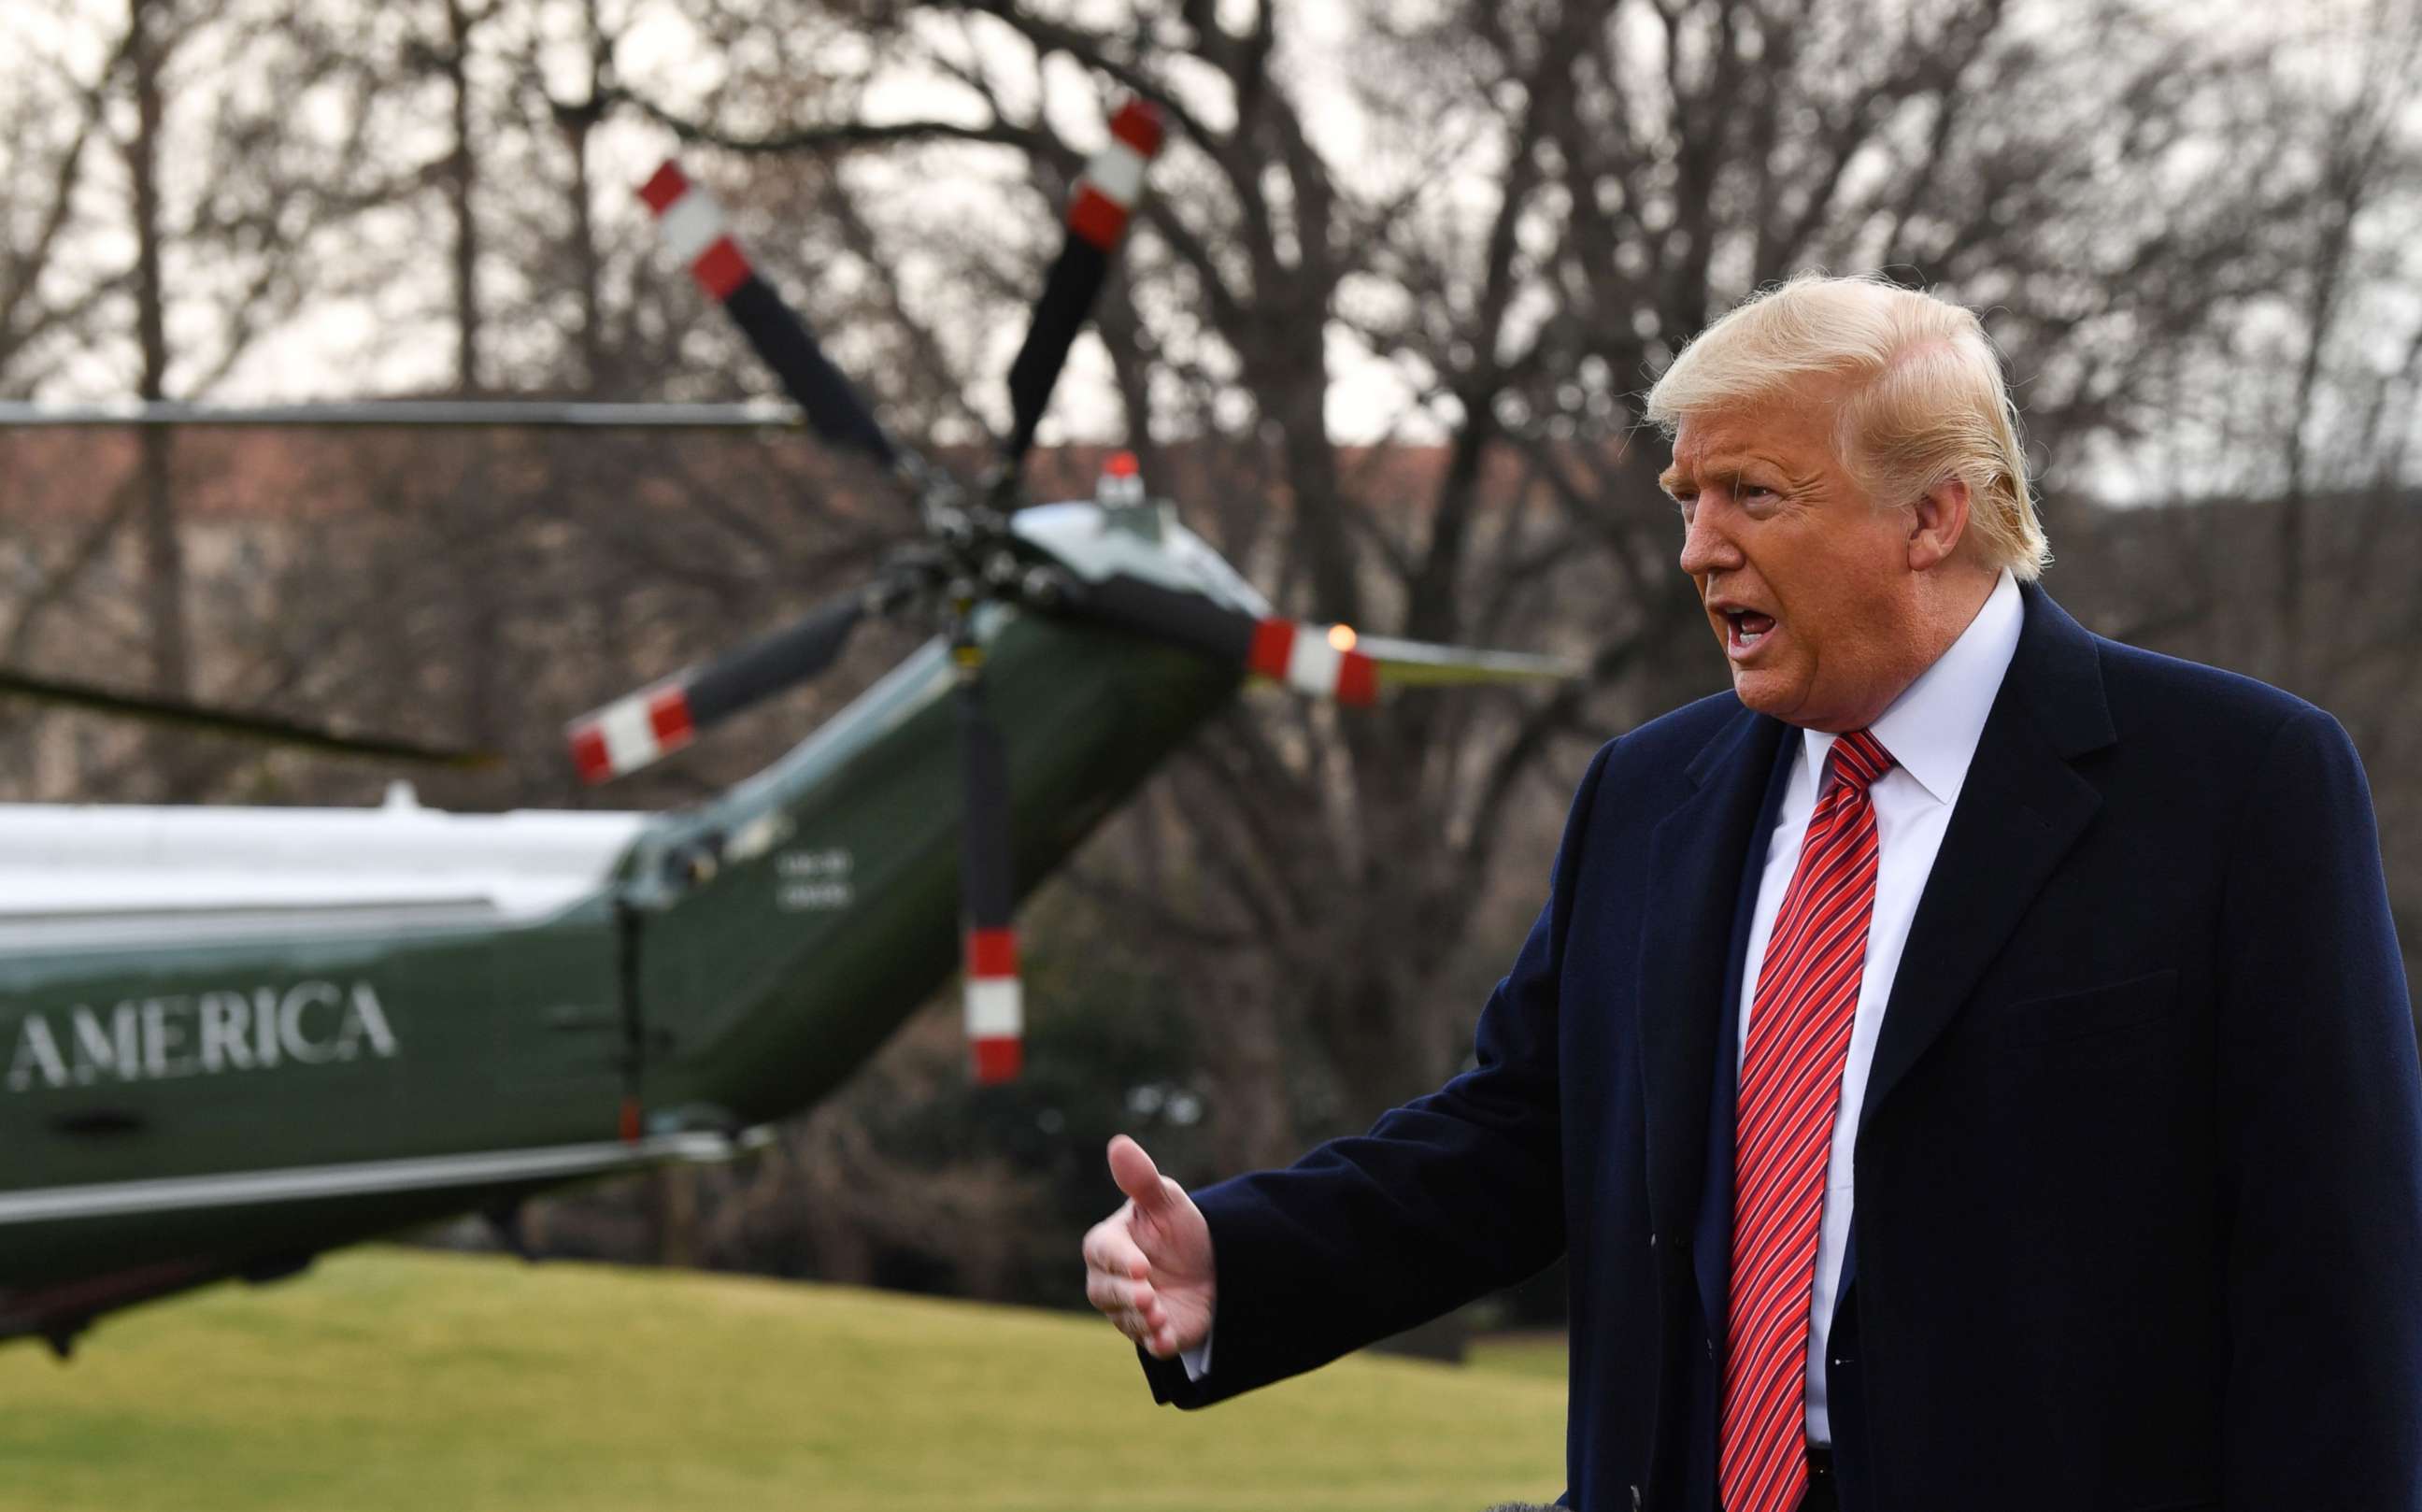 PHOTO: President Donald Trump speaks to the media prior to his departure from the South Lawn of the White House in Washington, DC, Feb. 28, 2020.